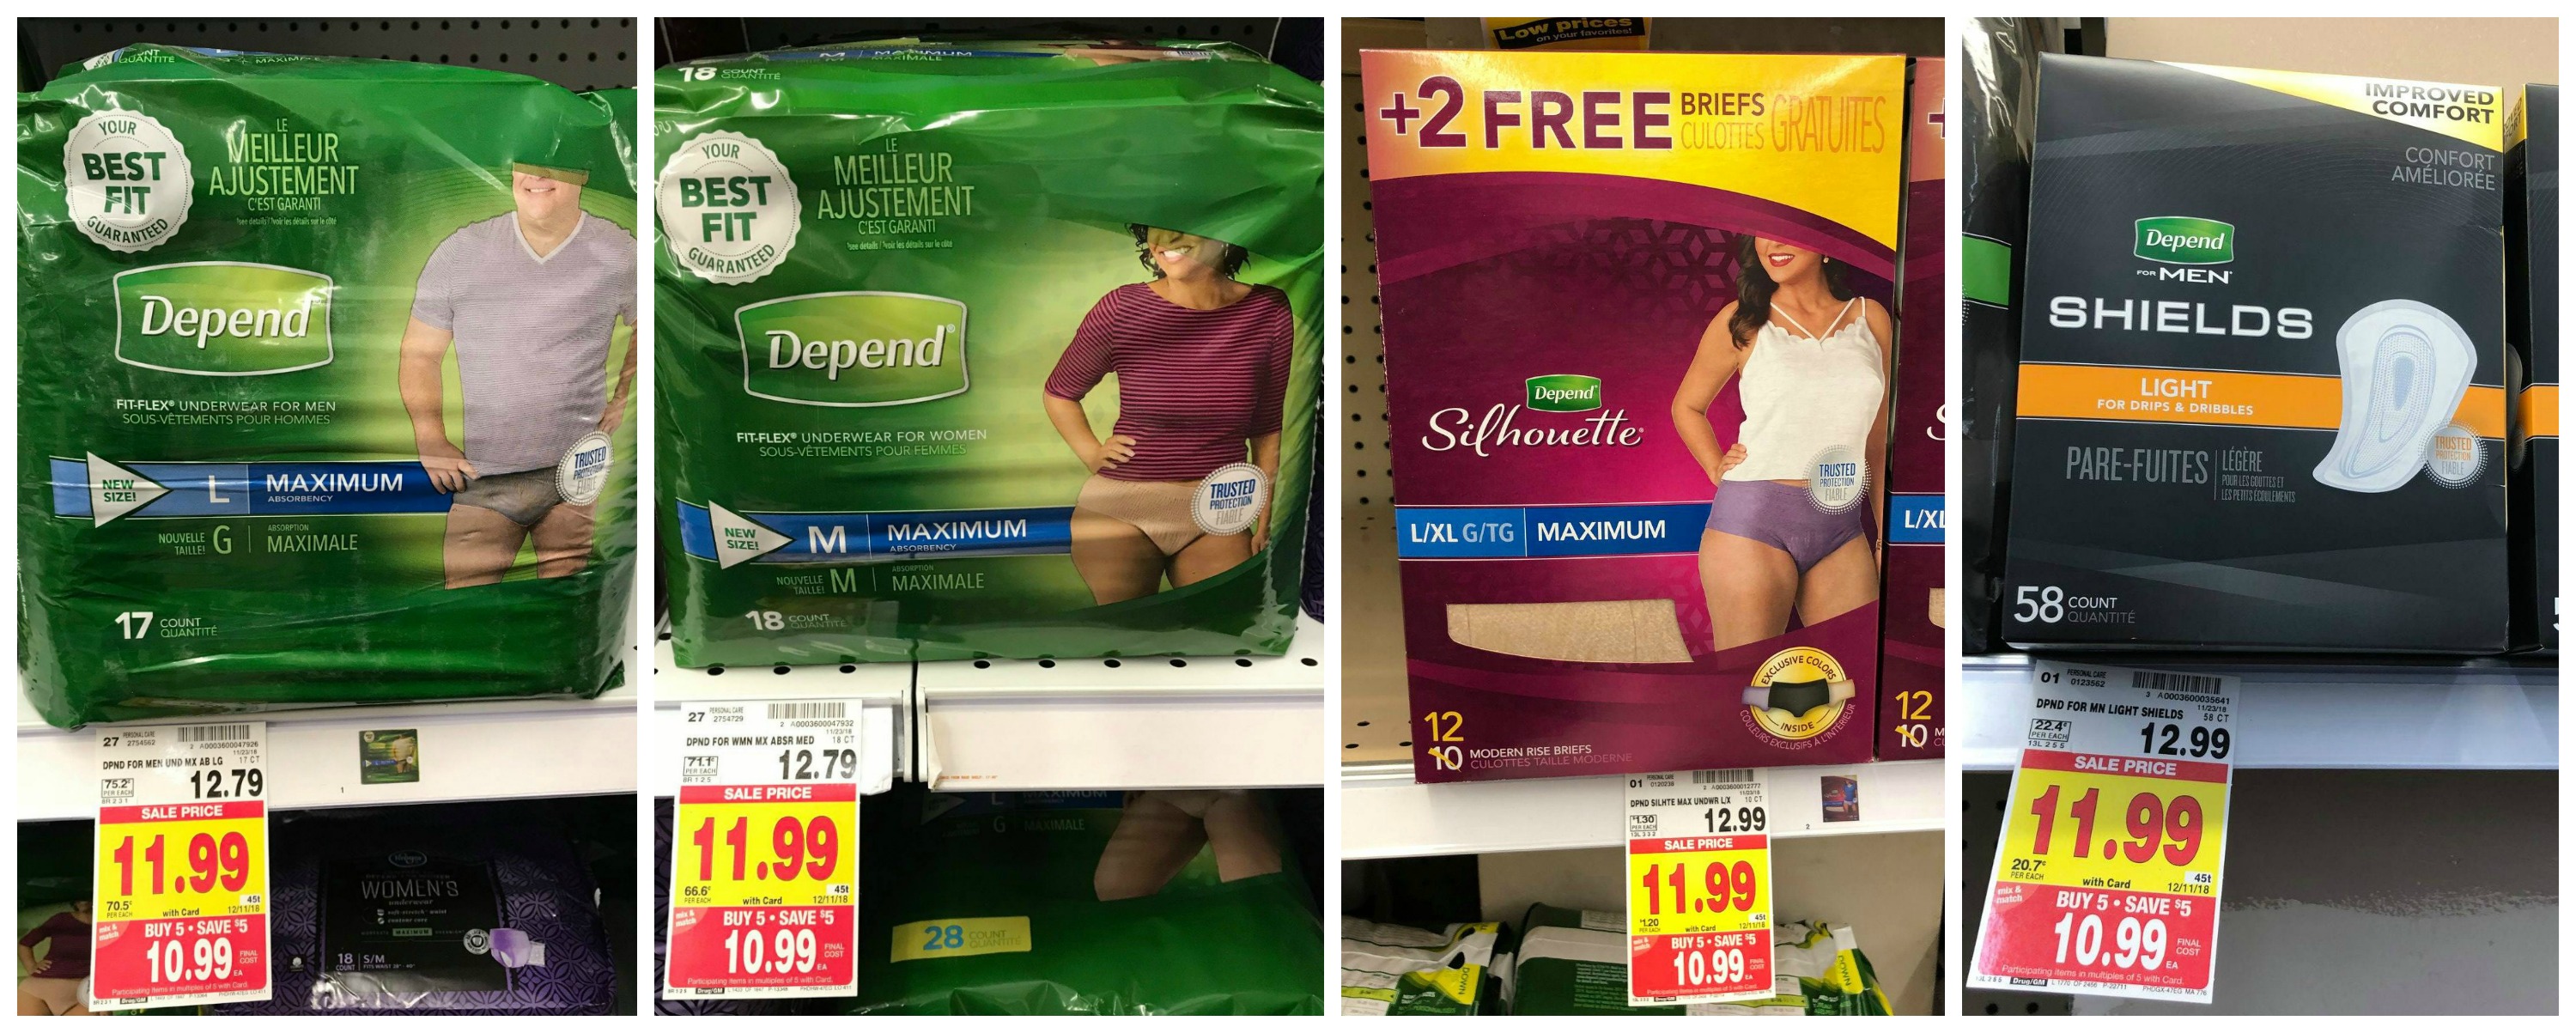 Great Deals on Depend and Poise with Kroger Mega Event! Pay as low as  $5.99! - Kroger Krazy